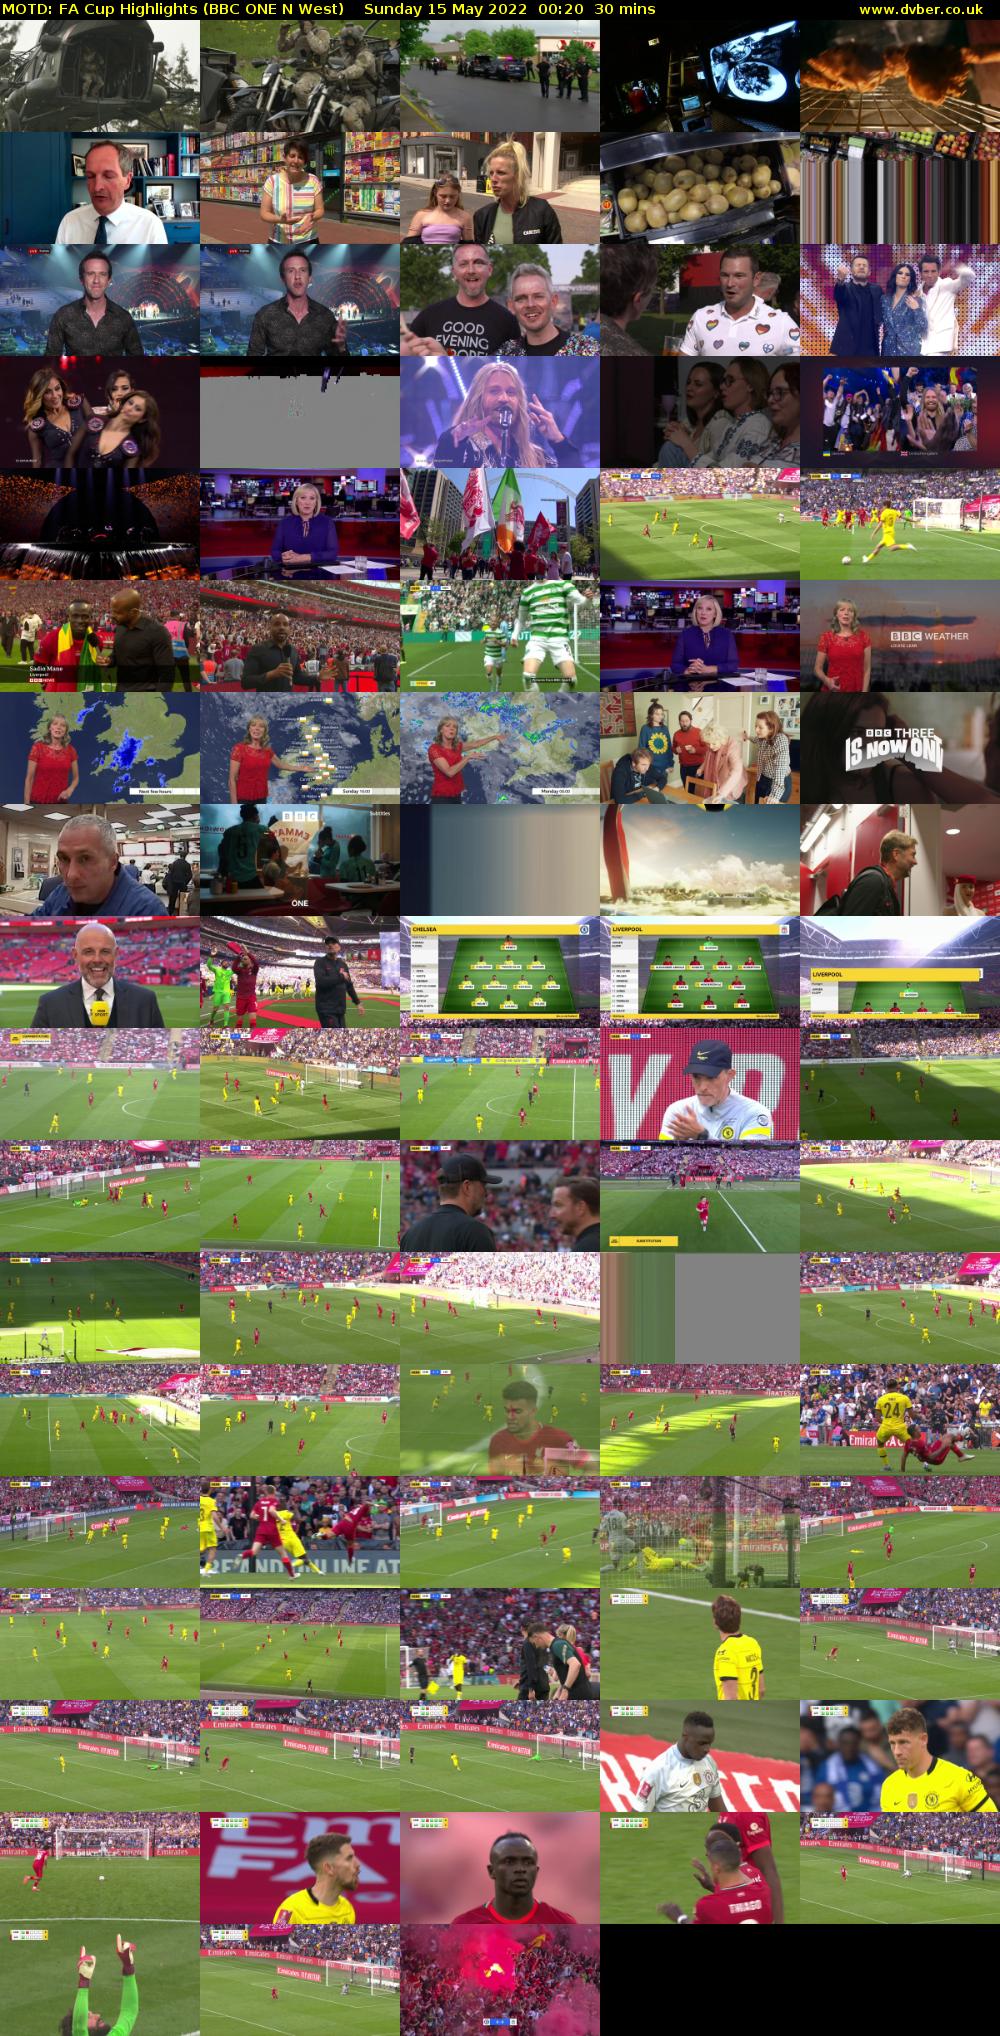 MOTD: FA Cup Highlights (BBC ONE N West) Sunday 15 May 2022 00:20 - 00:50